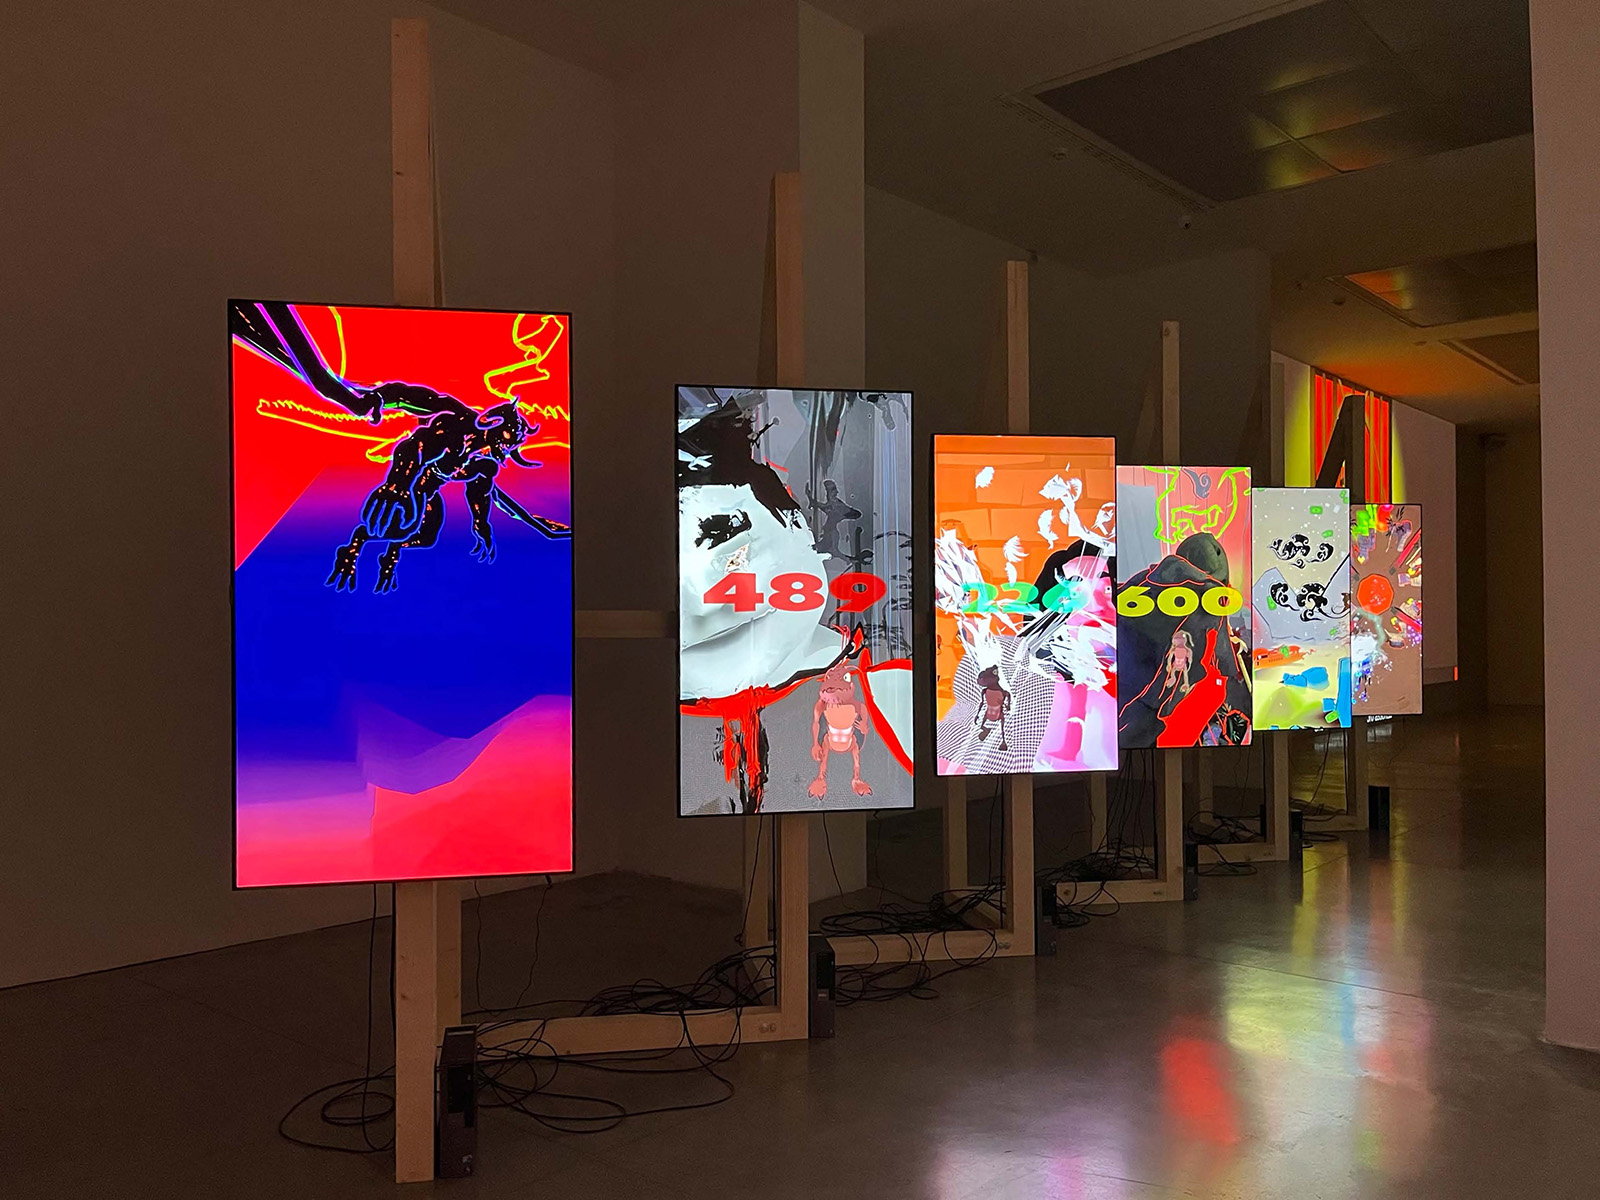 Brightly colored digital screens arranged in a gallery